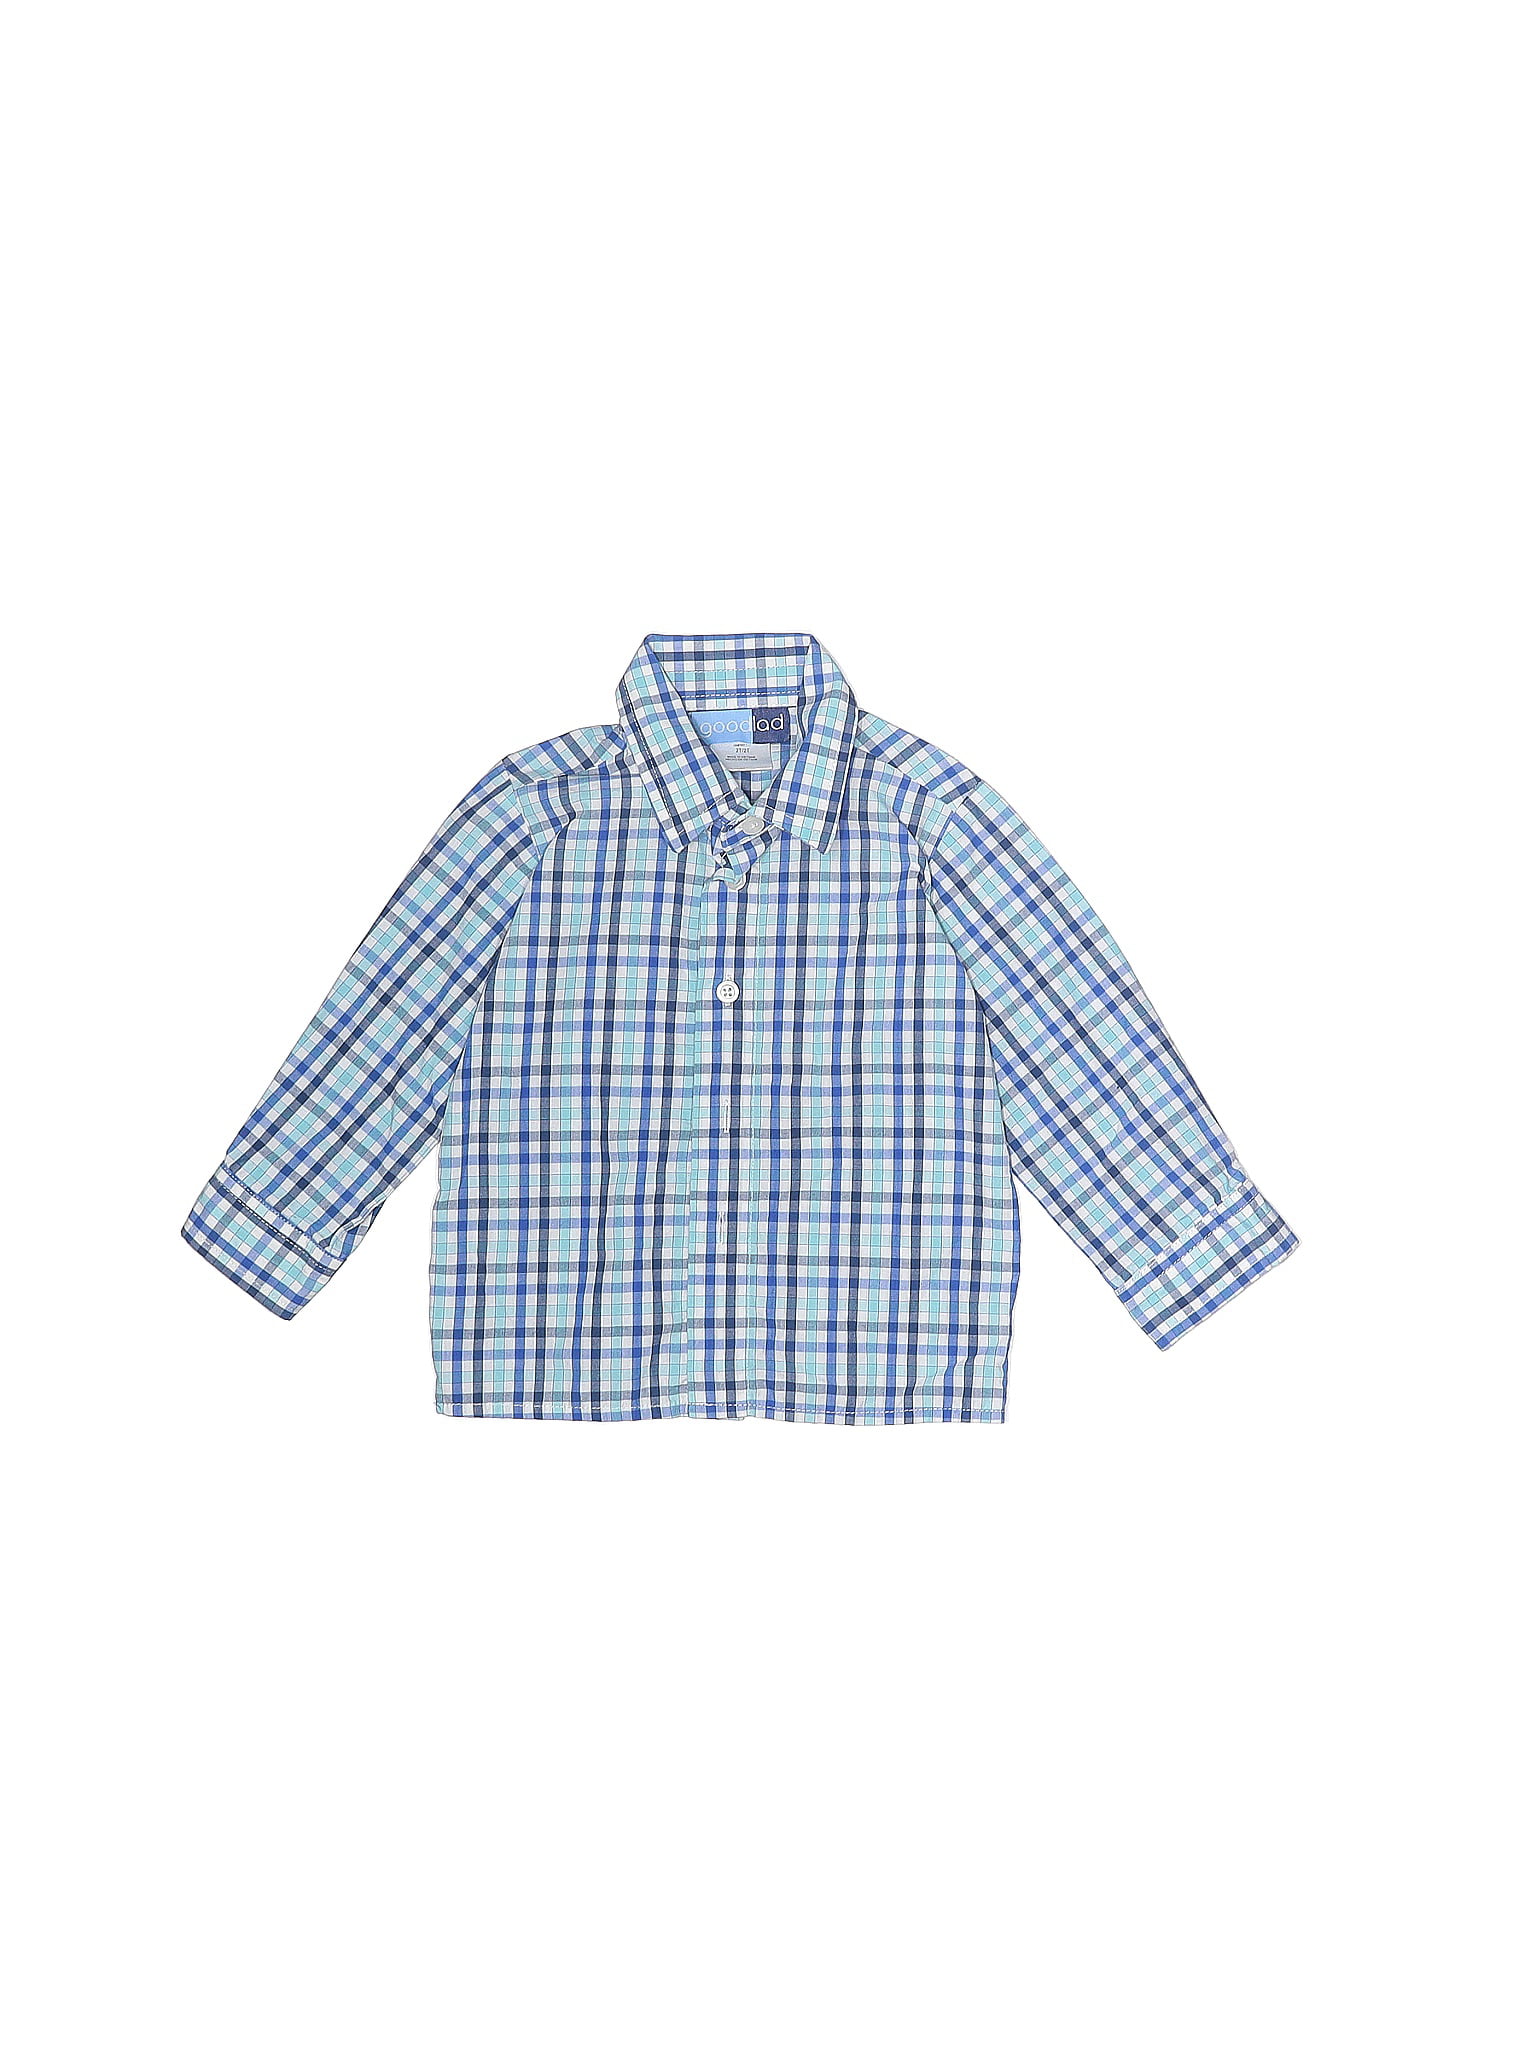 Details about   Wonder Nation Boys Gingham Button Down Shirt Teal 